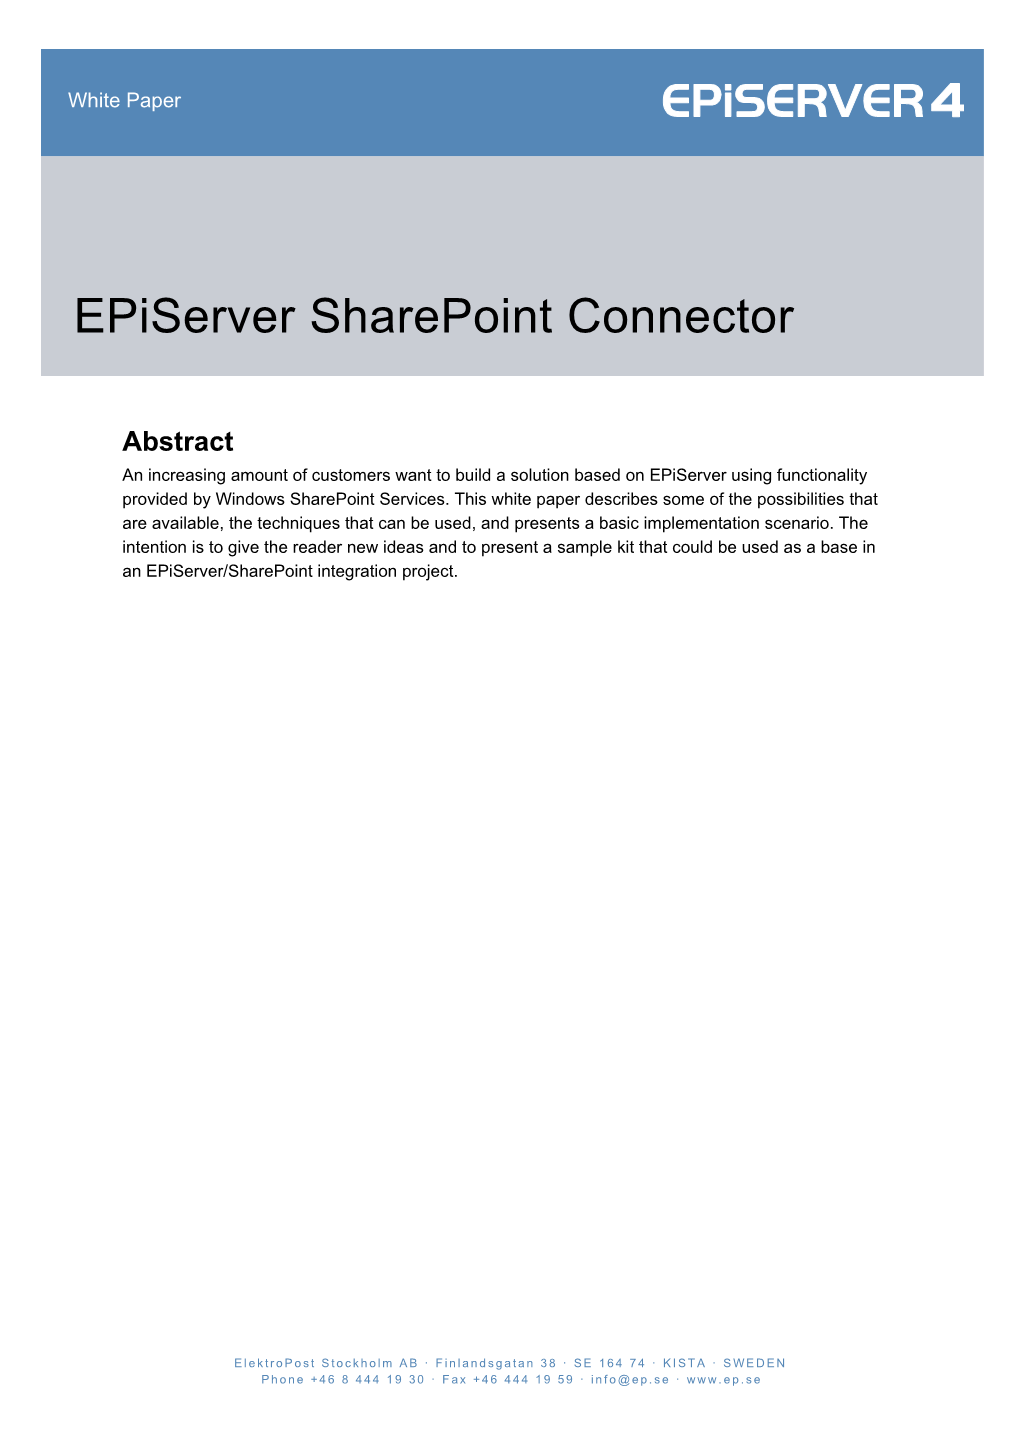 Building Solutions on Episerver and Sharepoint